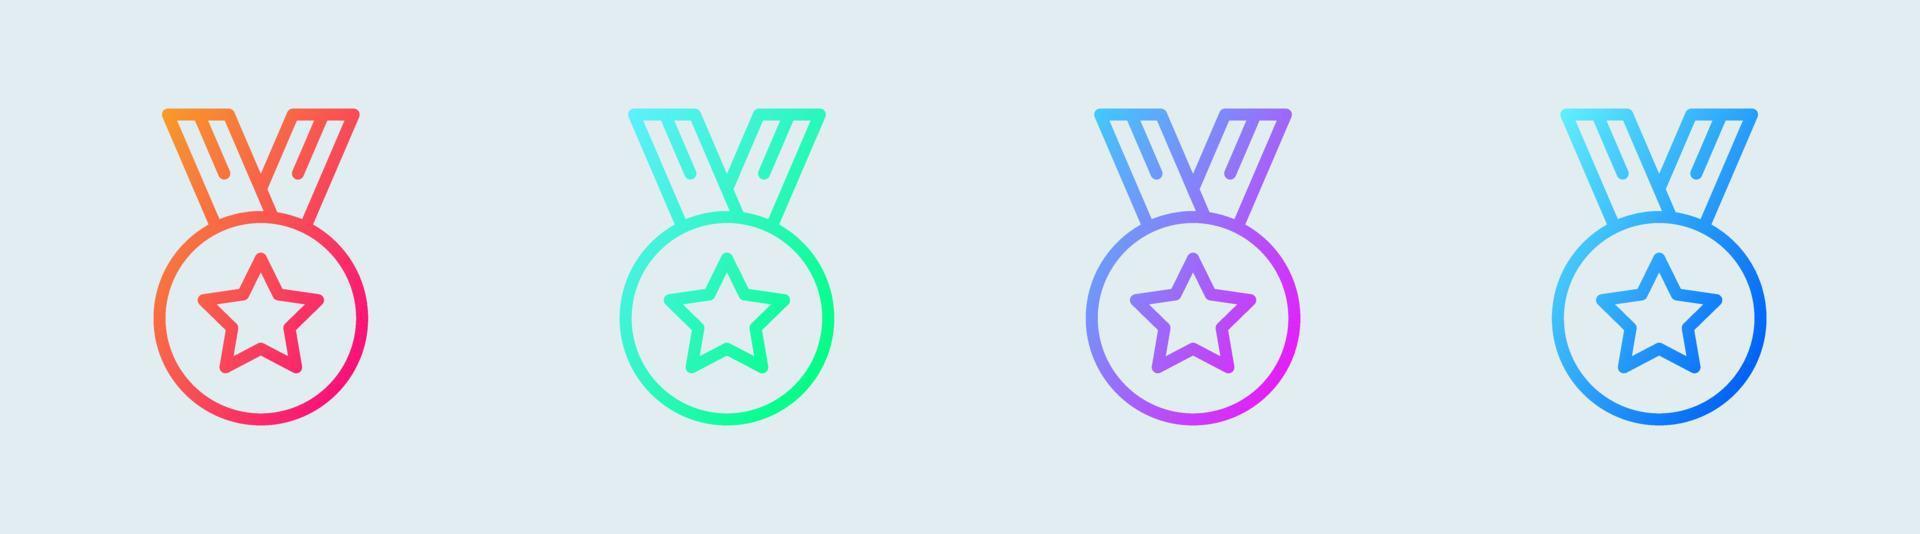 Medal line icon in gradient colors. Award signs vector illustration.